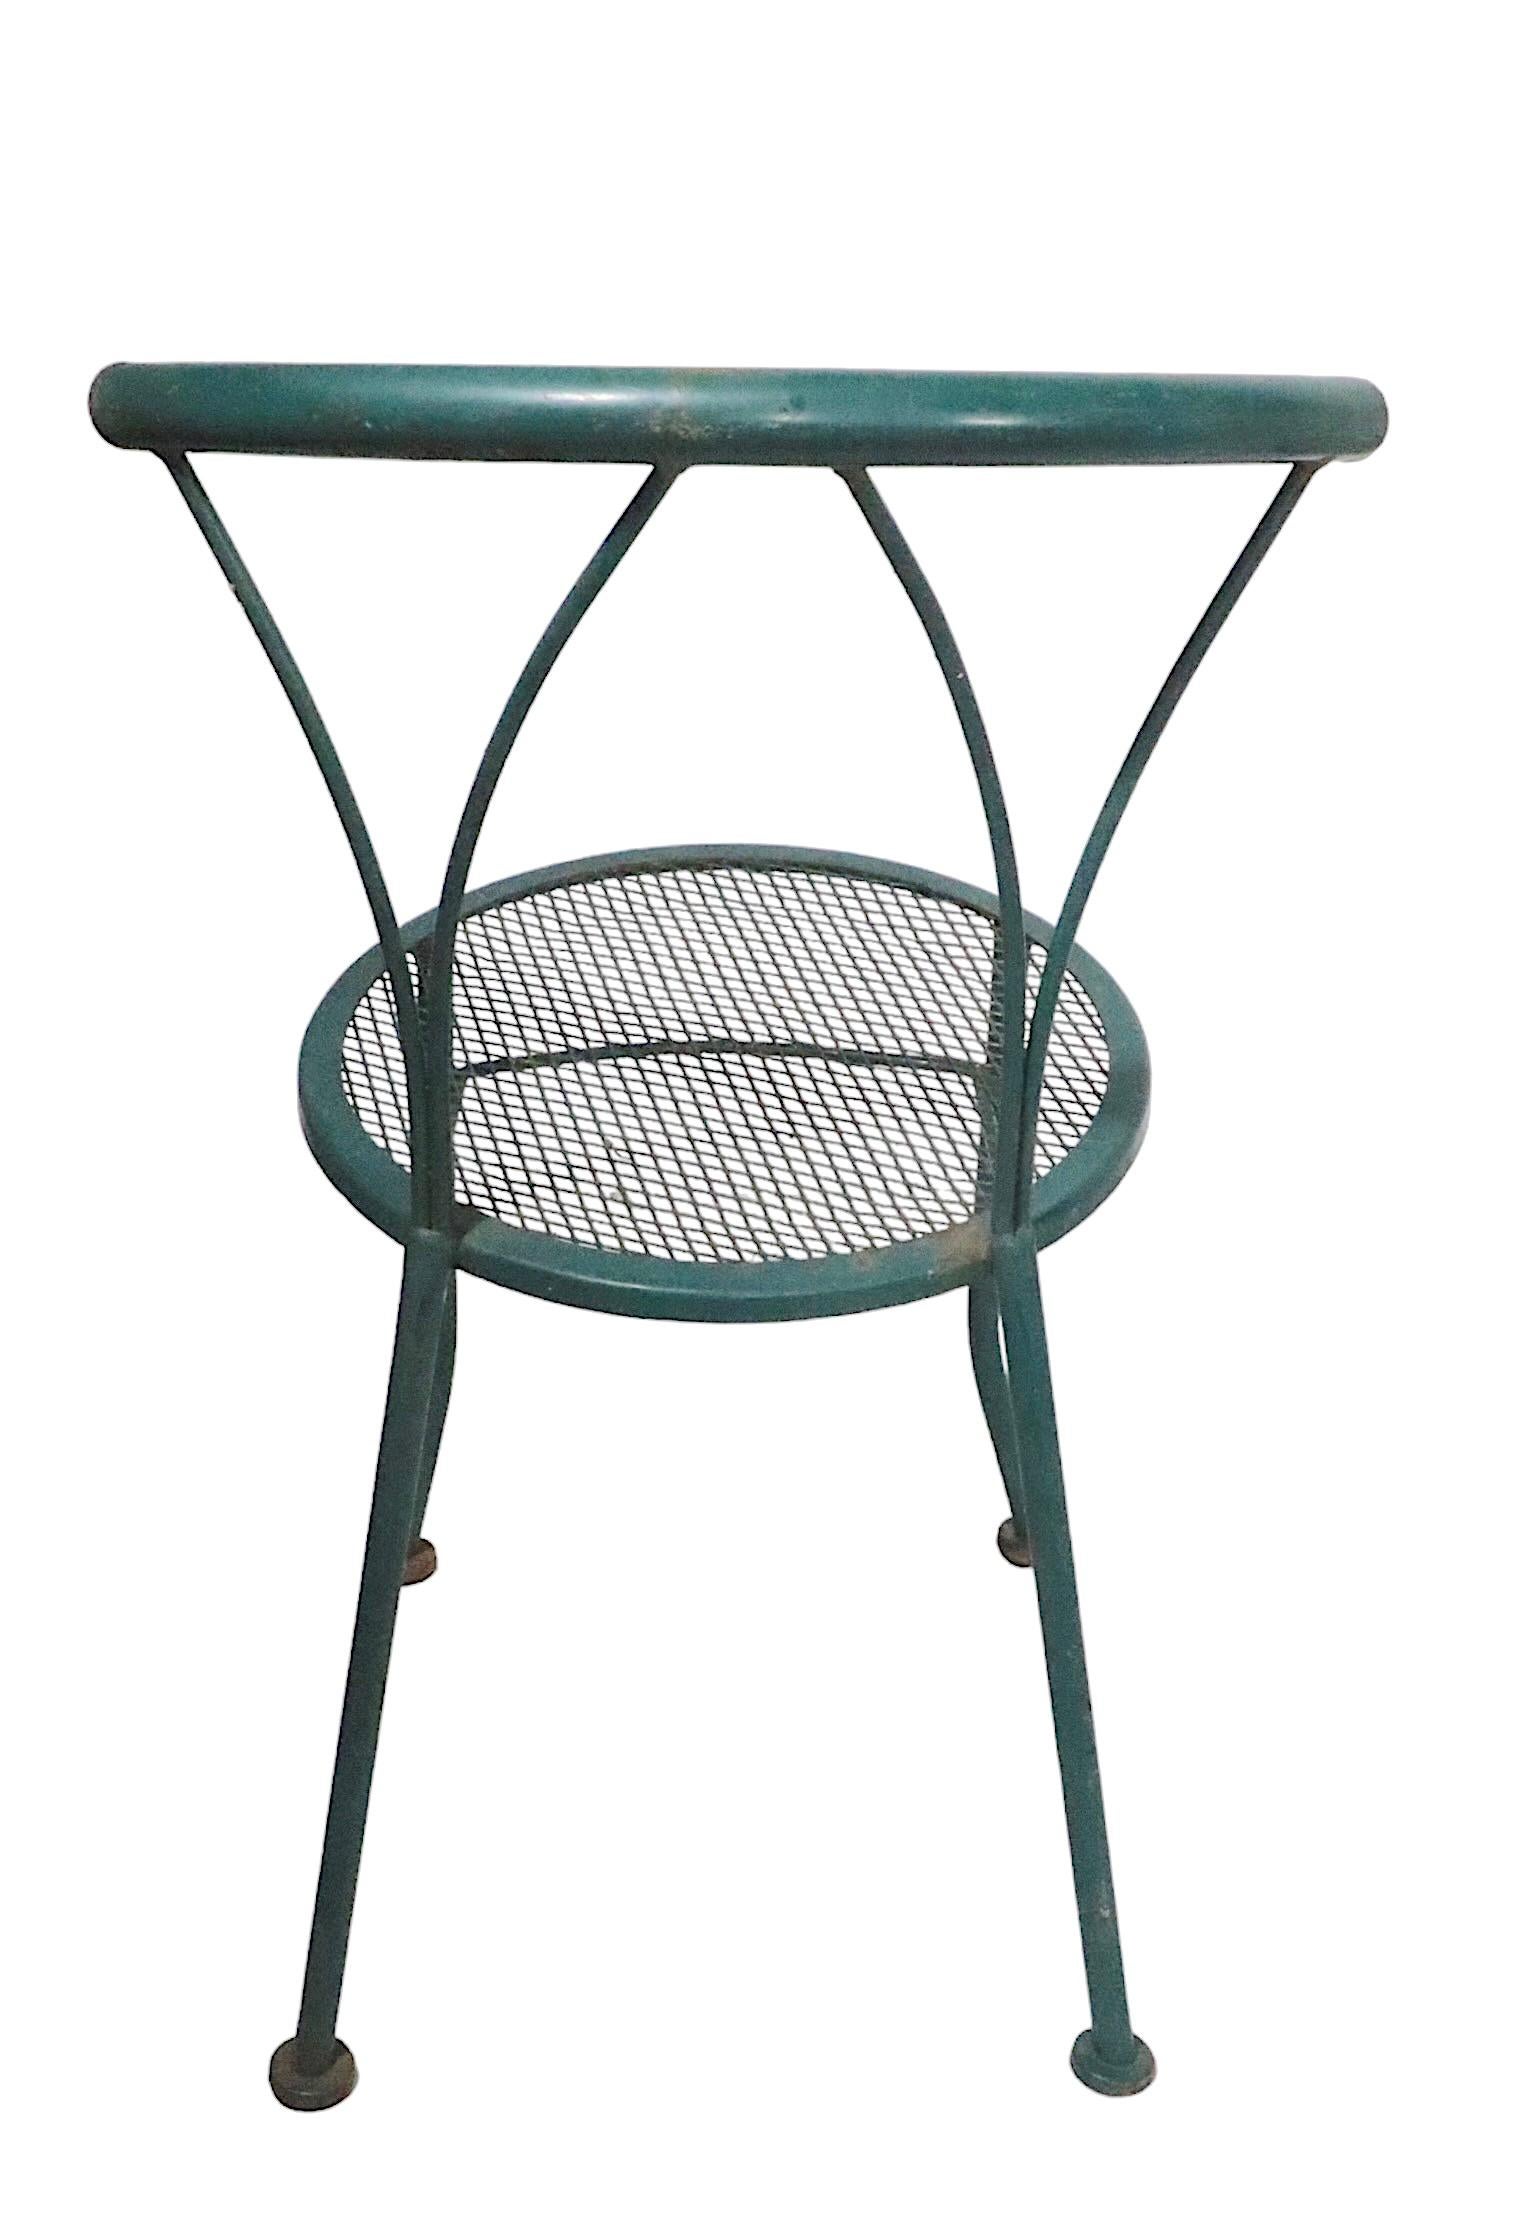 American Pr. Wrought Iron and Metal Mesh Garden Patio Poolside Bistro Cafe  Dining Chairs For Sale